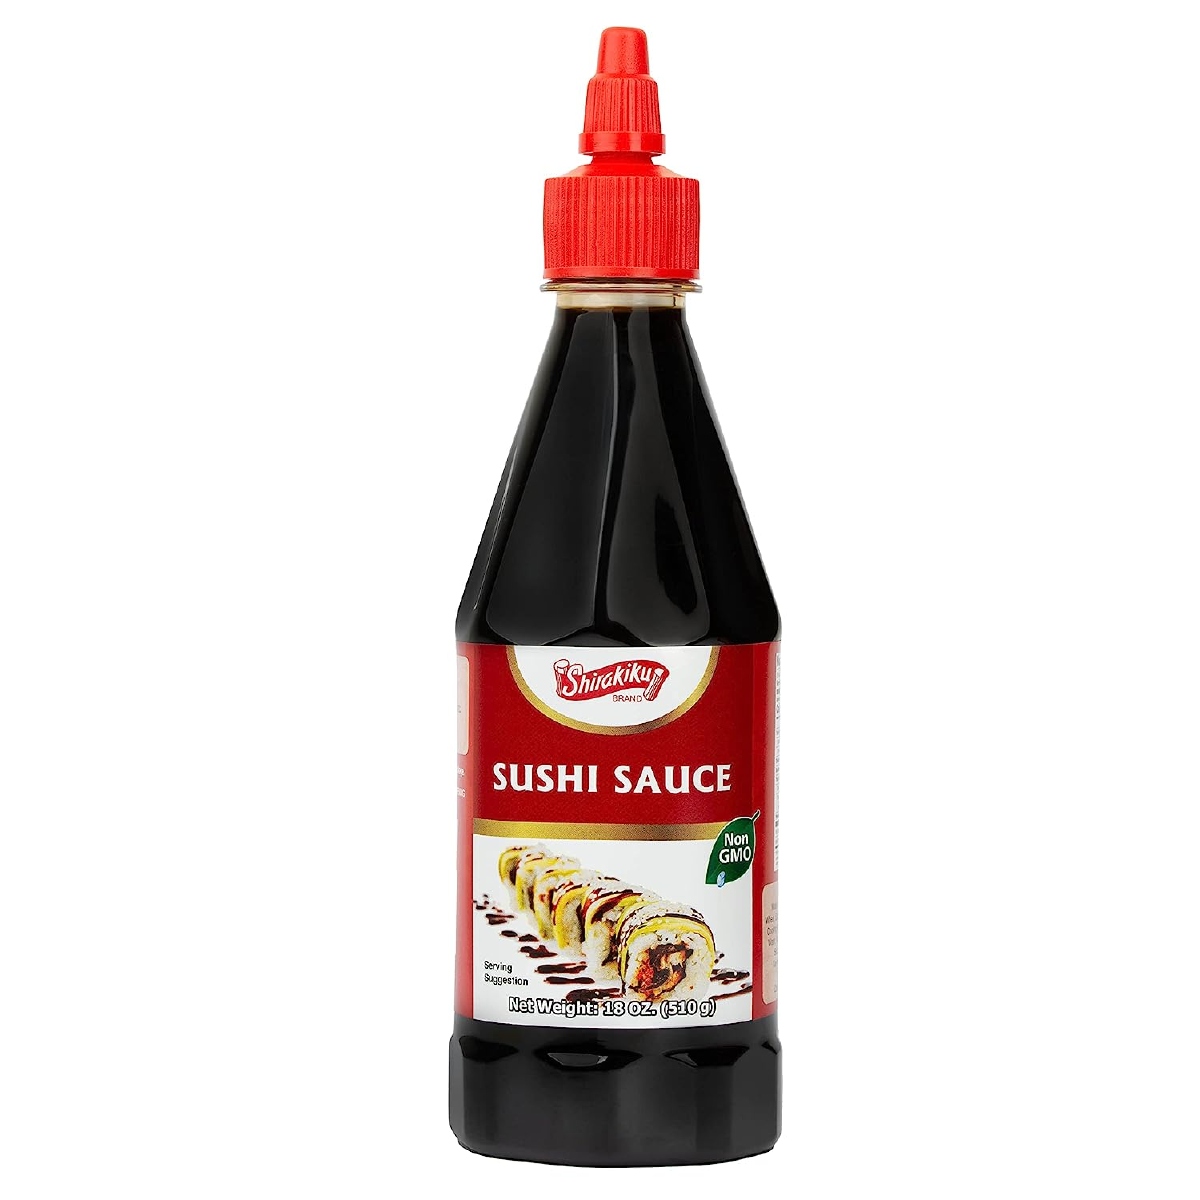 Plastic bottle of Shirakiku Japanese Eel Sauce with a red cap and dark label against a white background.